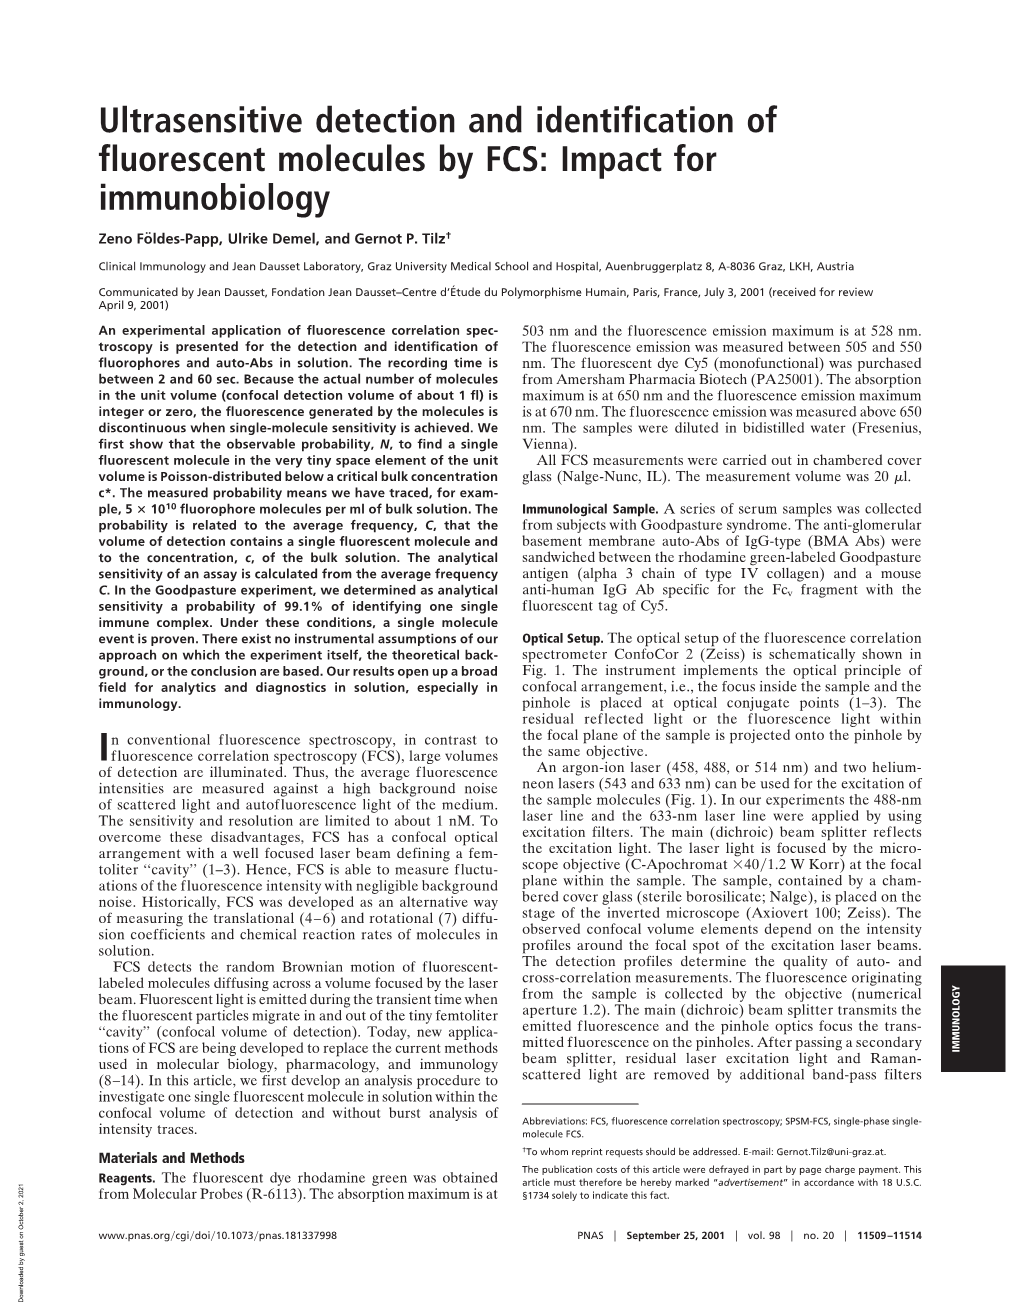 Ultrasensitive Detection and Identification of Fluorescent Molecules by FCS: Impact for Immunobiology